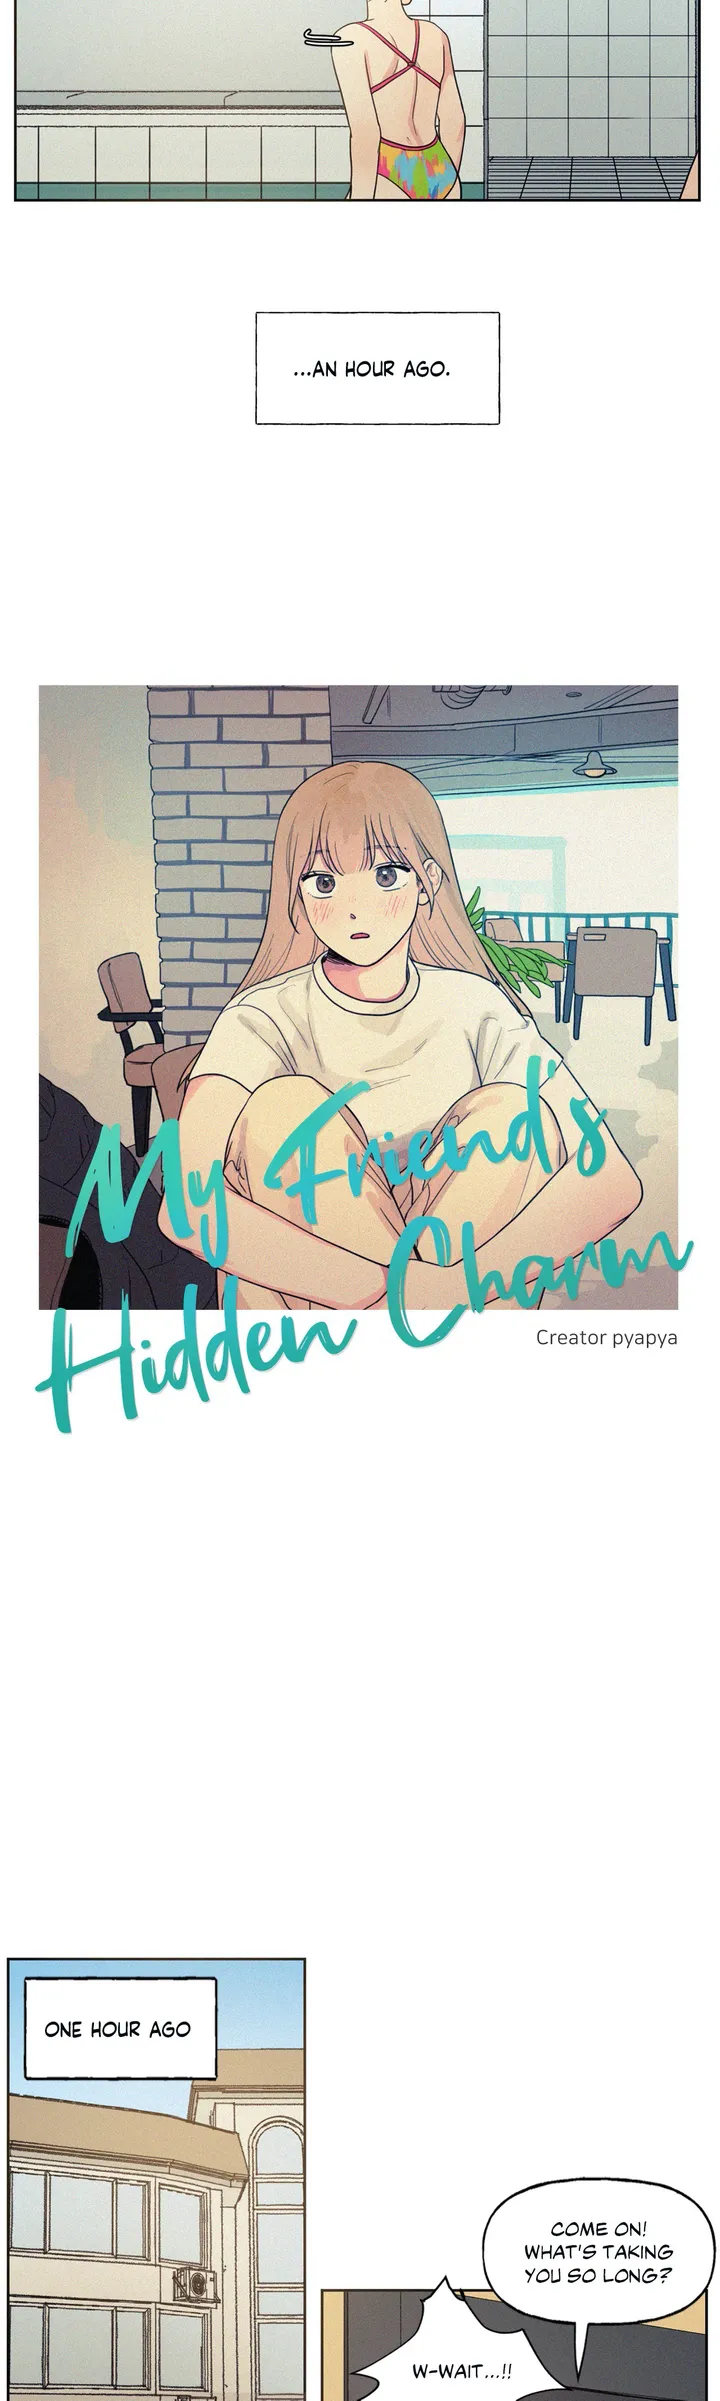 My Friend’s Hidden Charm - Chapter 1 Page 5